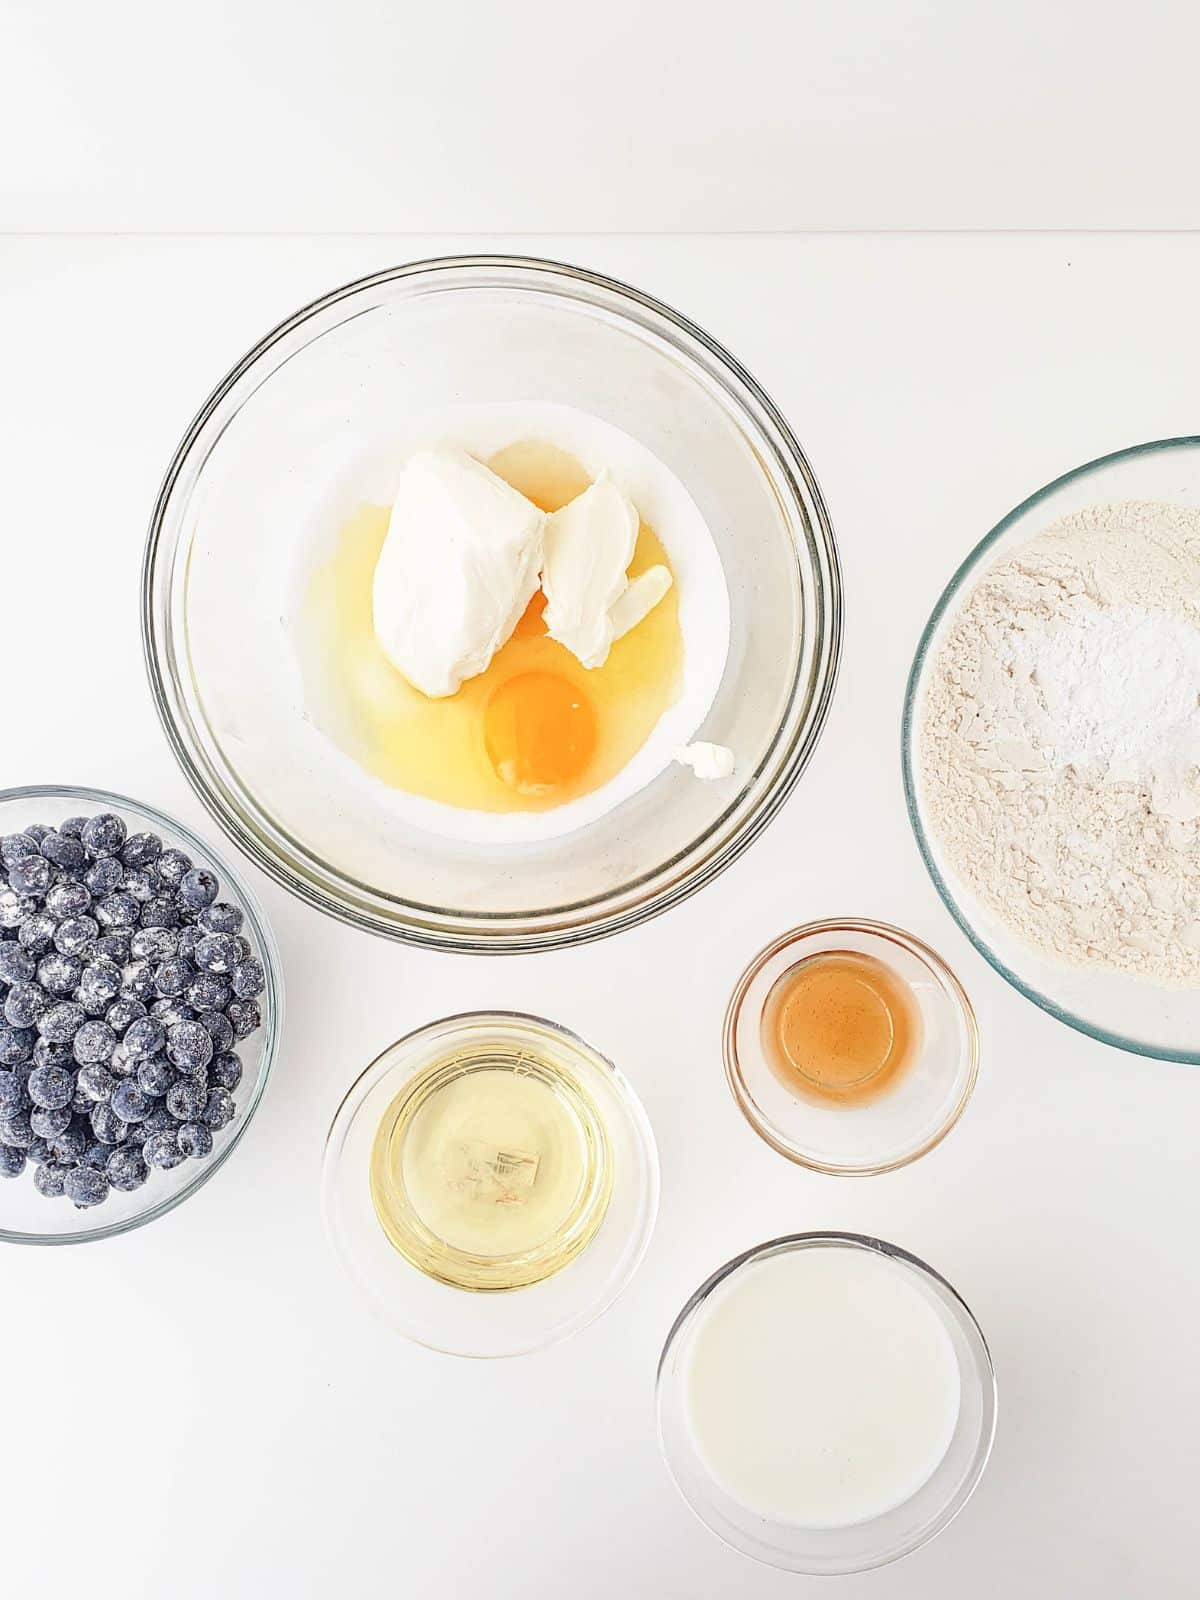 Ingredients for blueberry muffins.